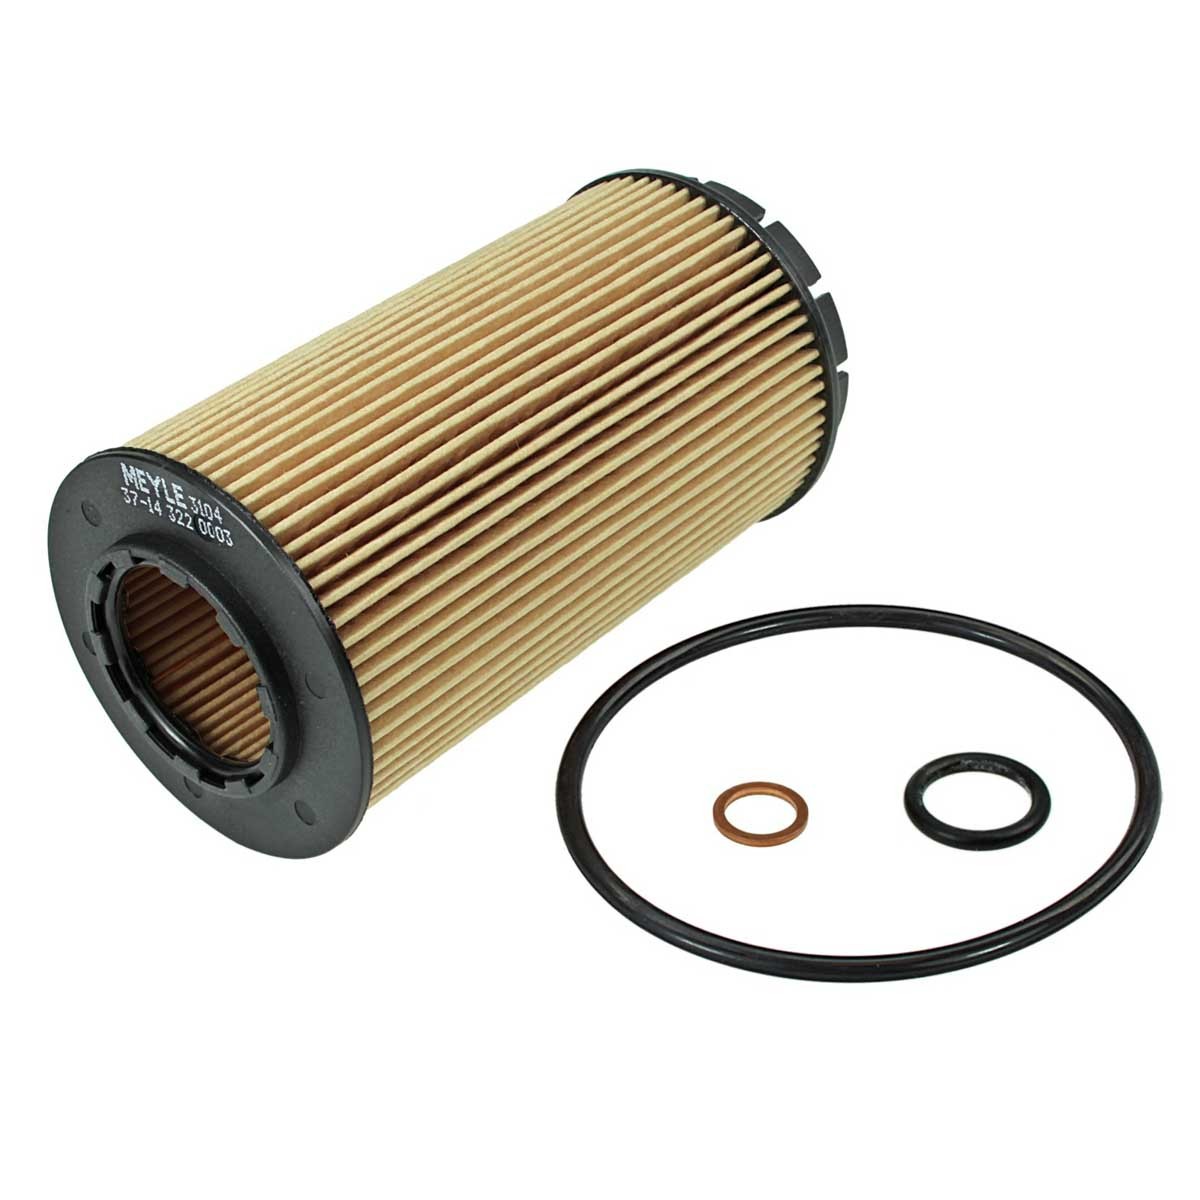 37-14 322 0003 MEYLE Oil filters CHRYSLER ORIGINAL Quality, with seal, Filter Insert